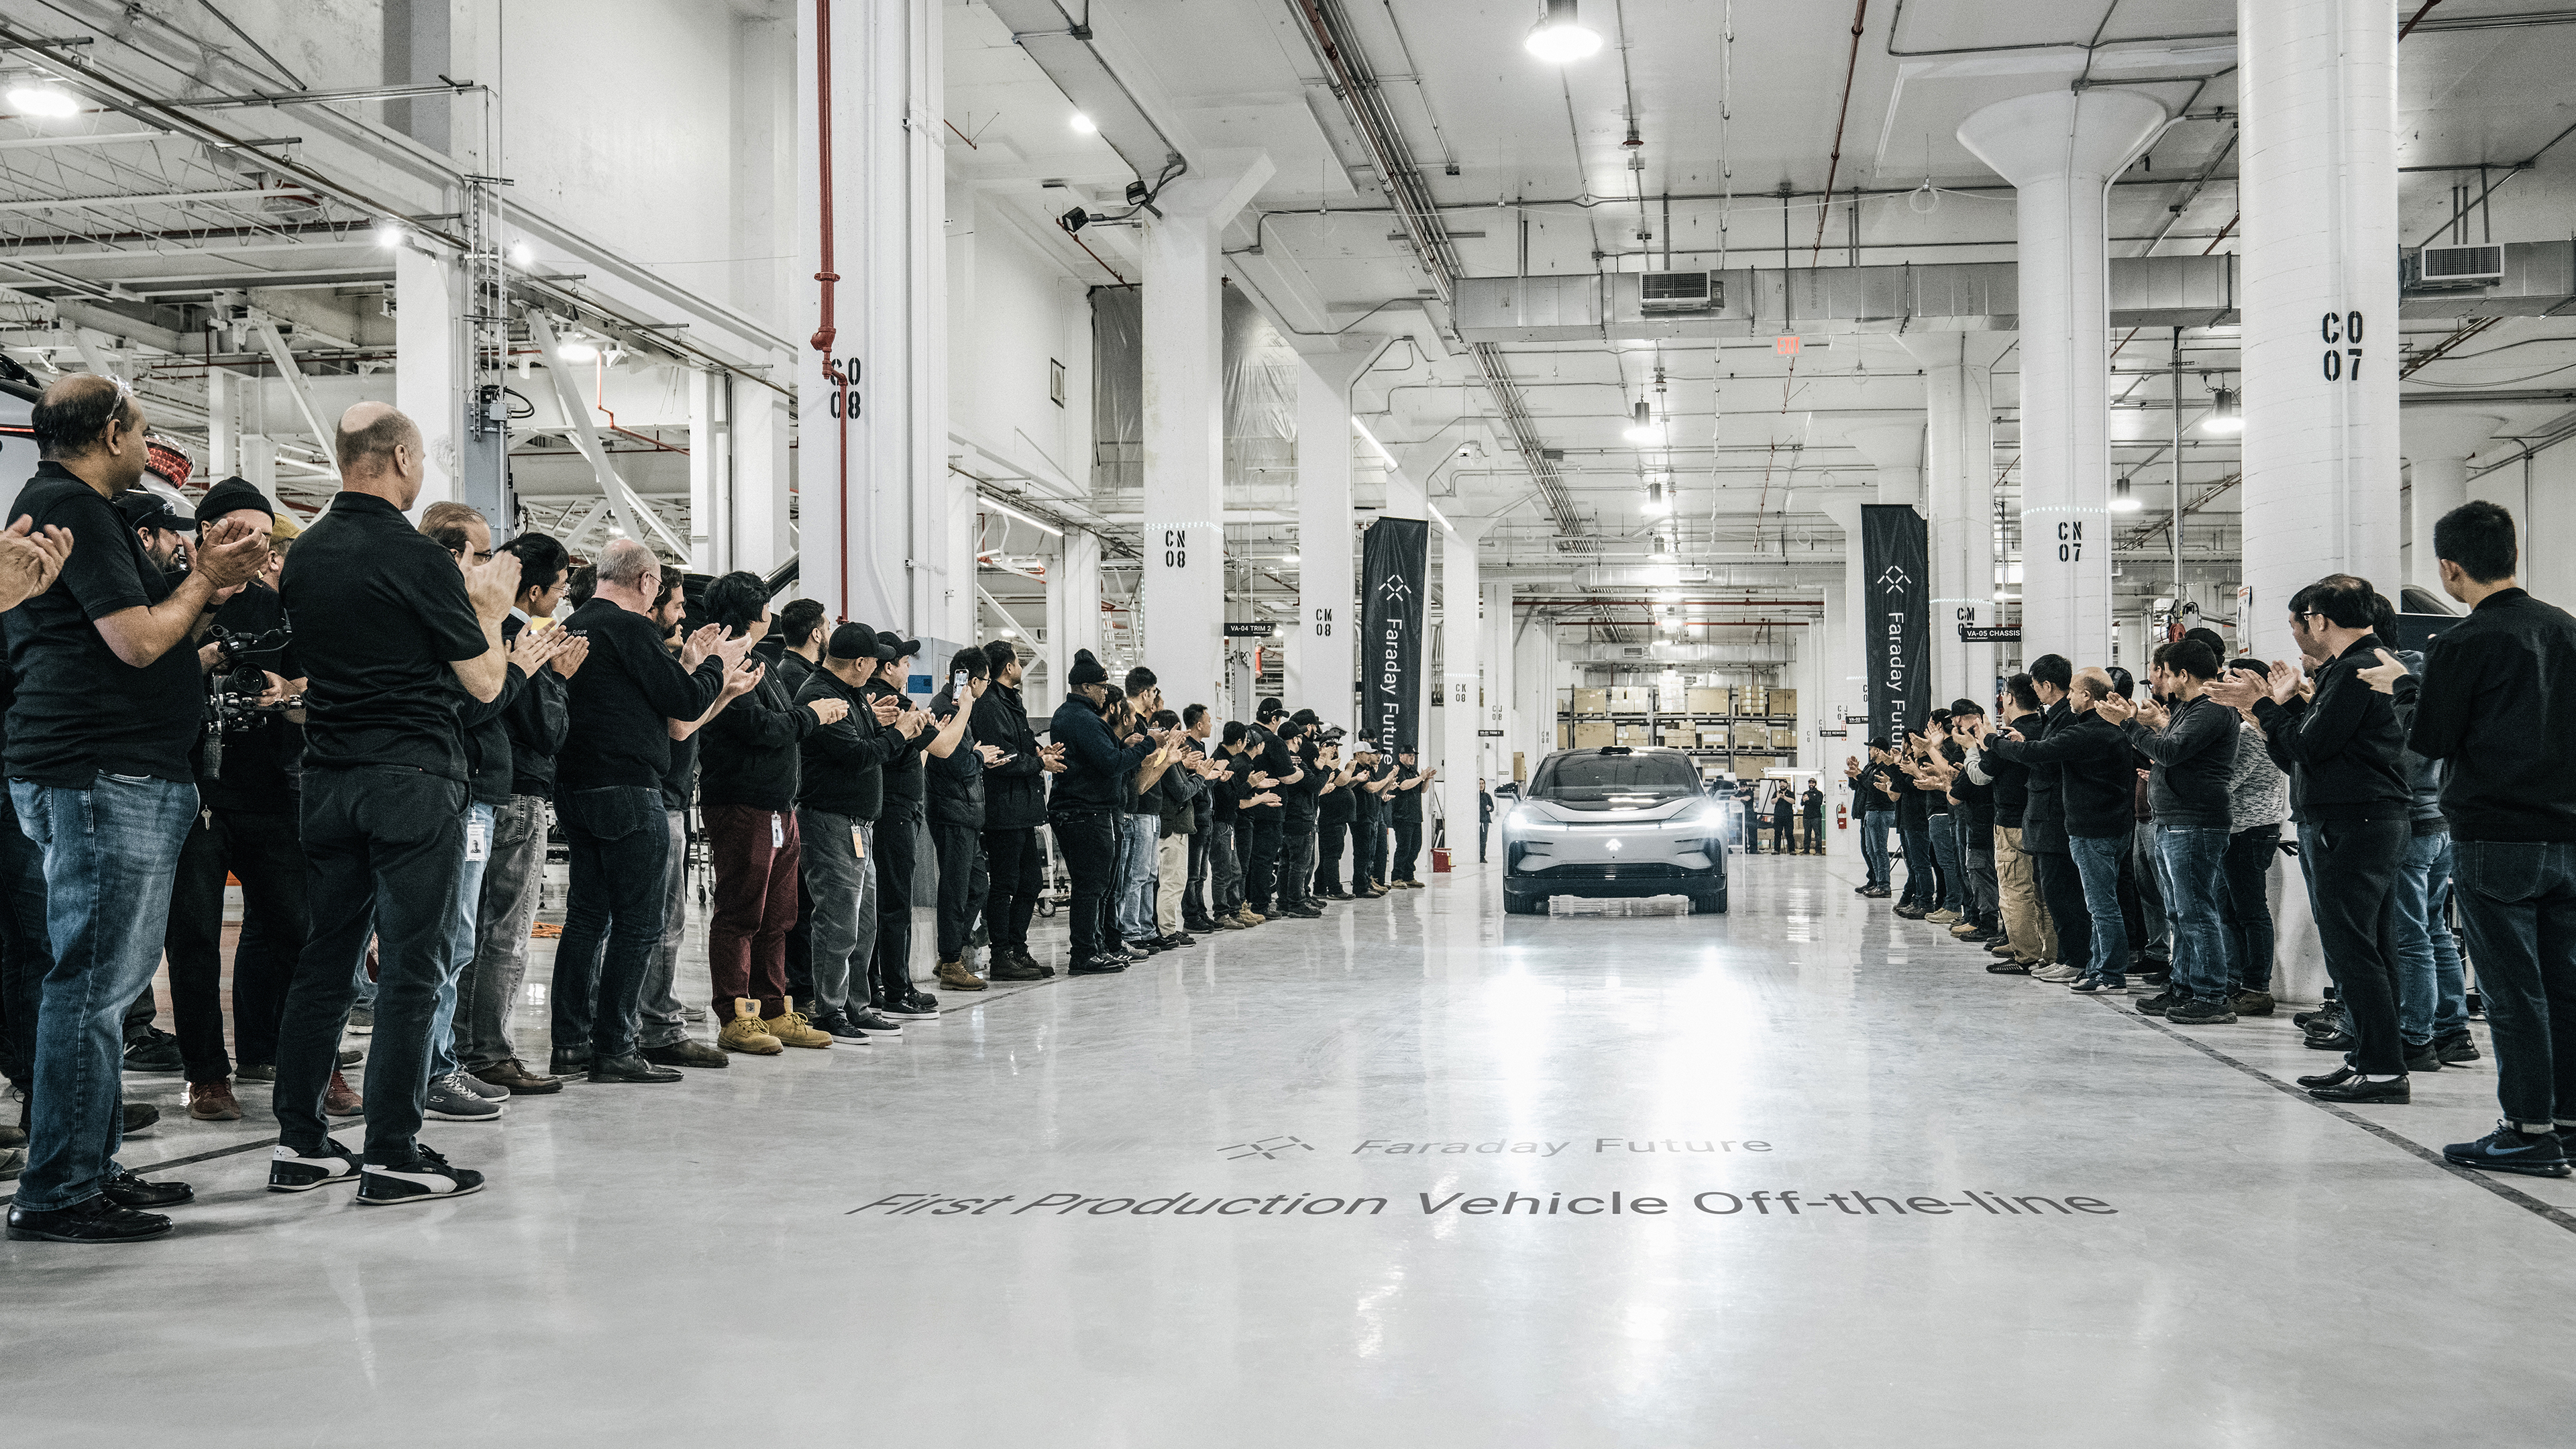 Here's When Faraday Future Plans Production Start